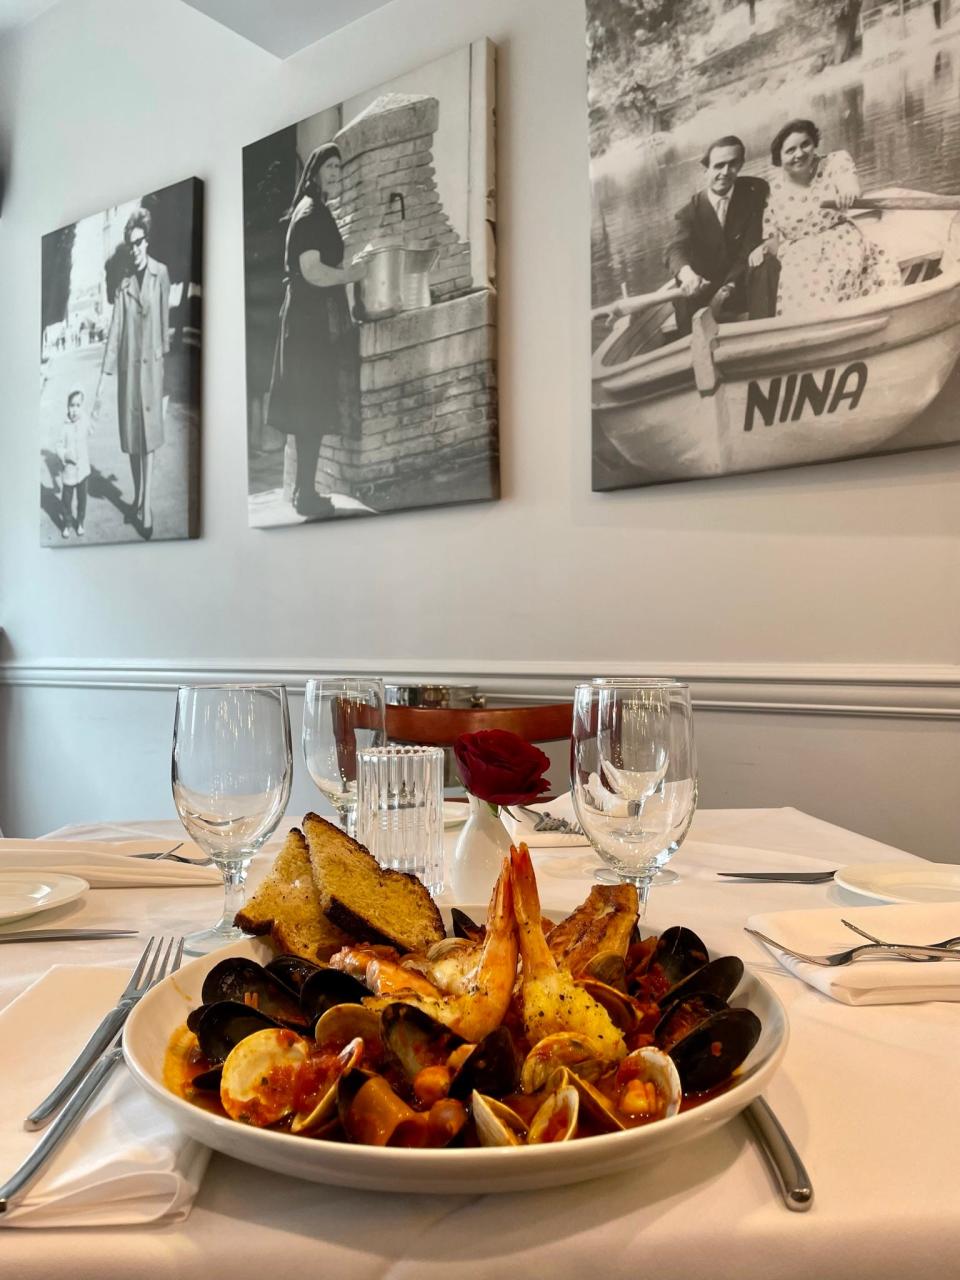 Cacciucco, a Tuscan fish stew with mussels, clams, monkfish, prawns, scungilli and calamari, served at Lupa Ristorante in Berkeley Heights.